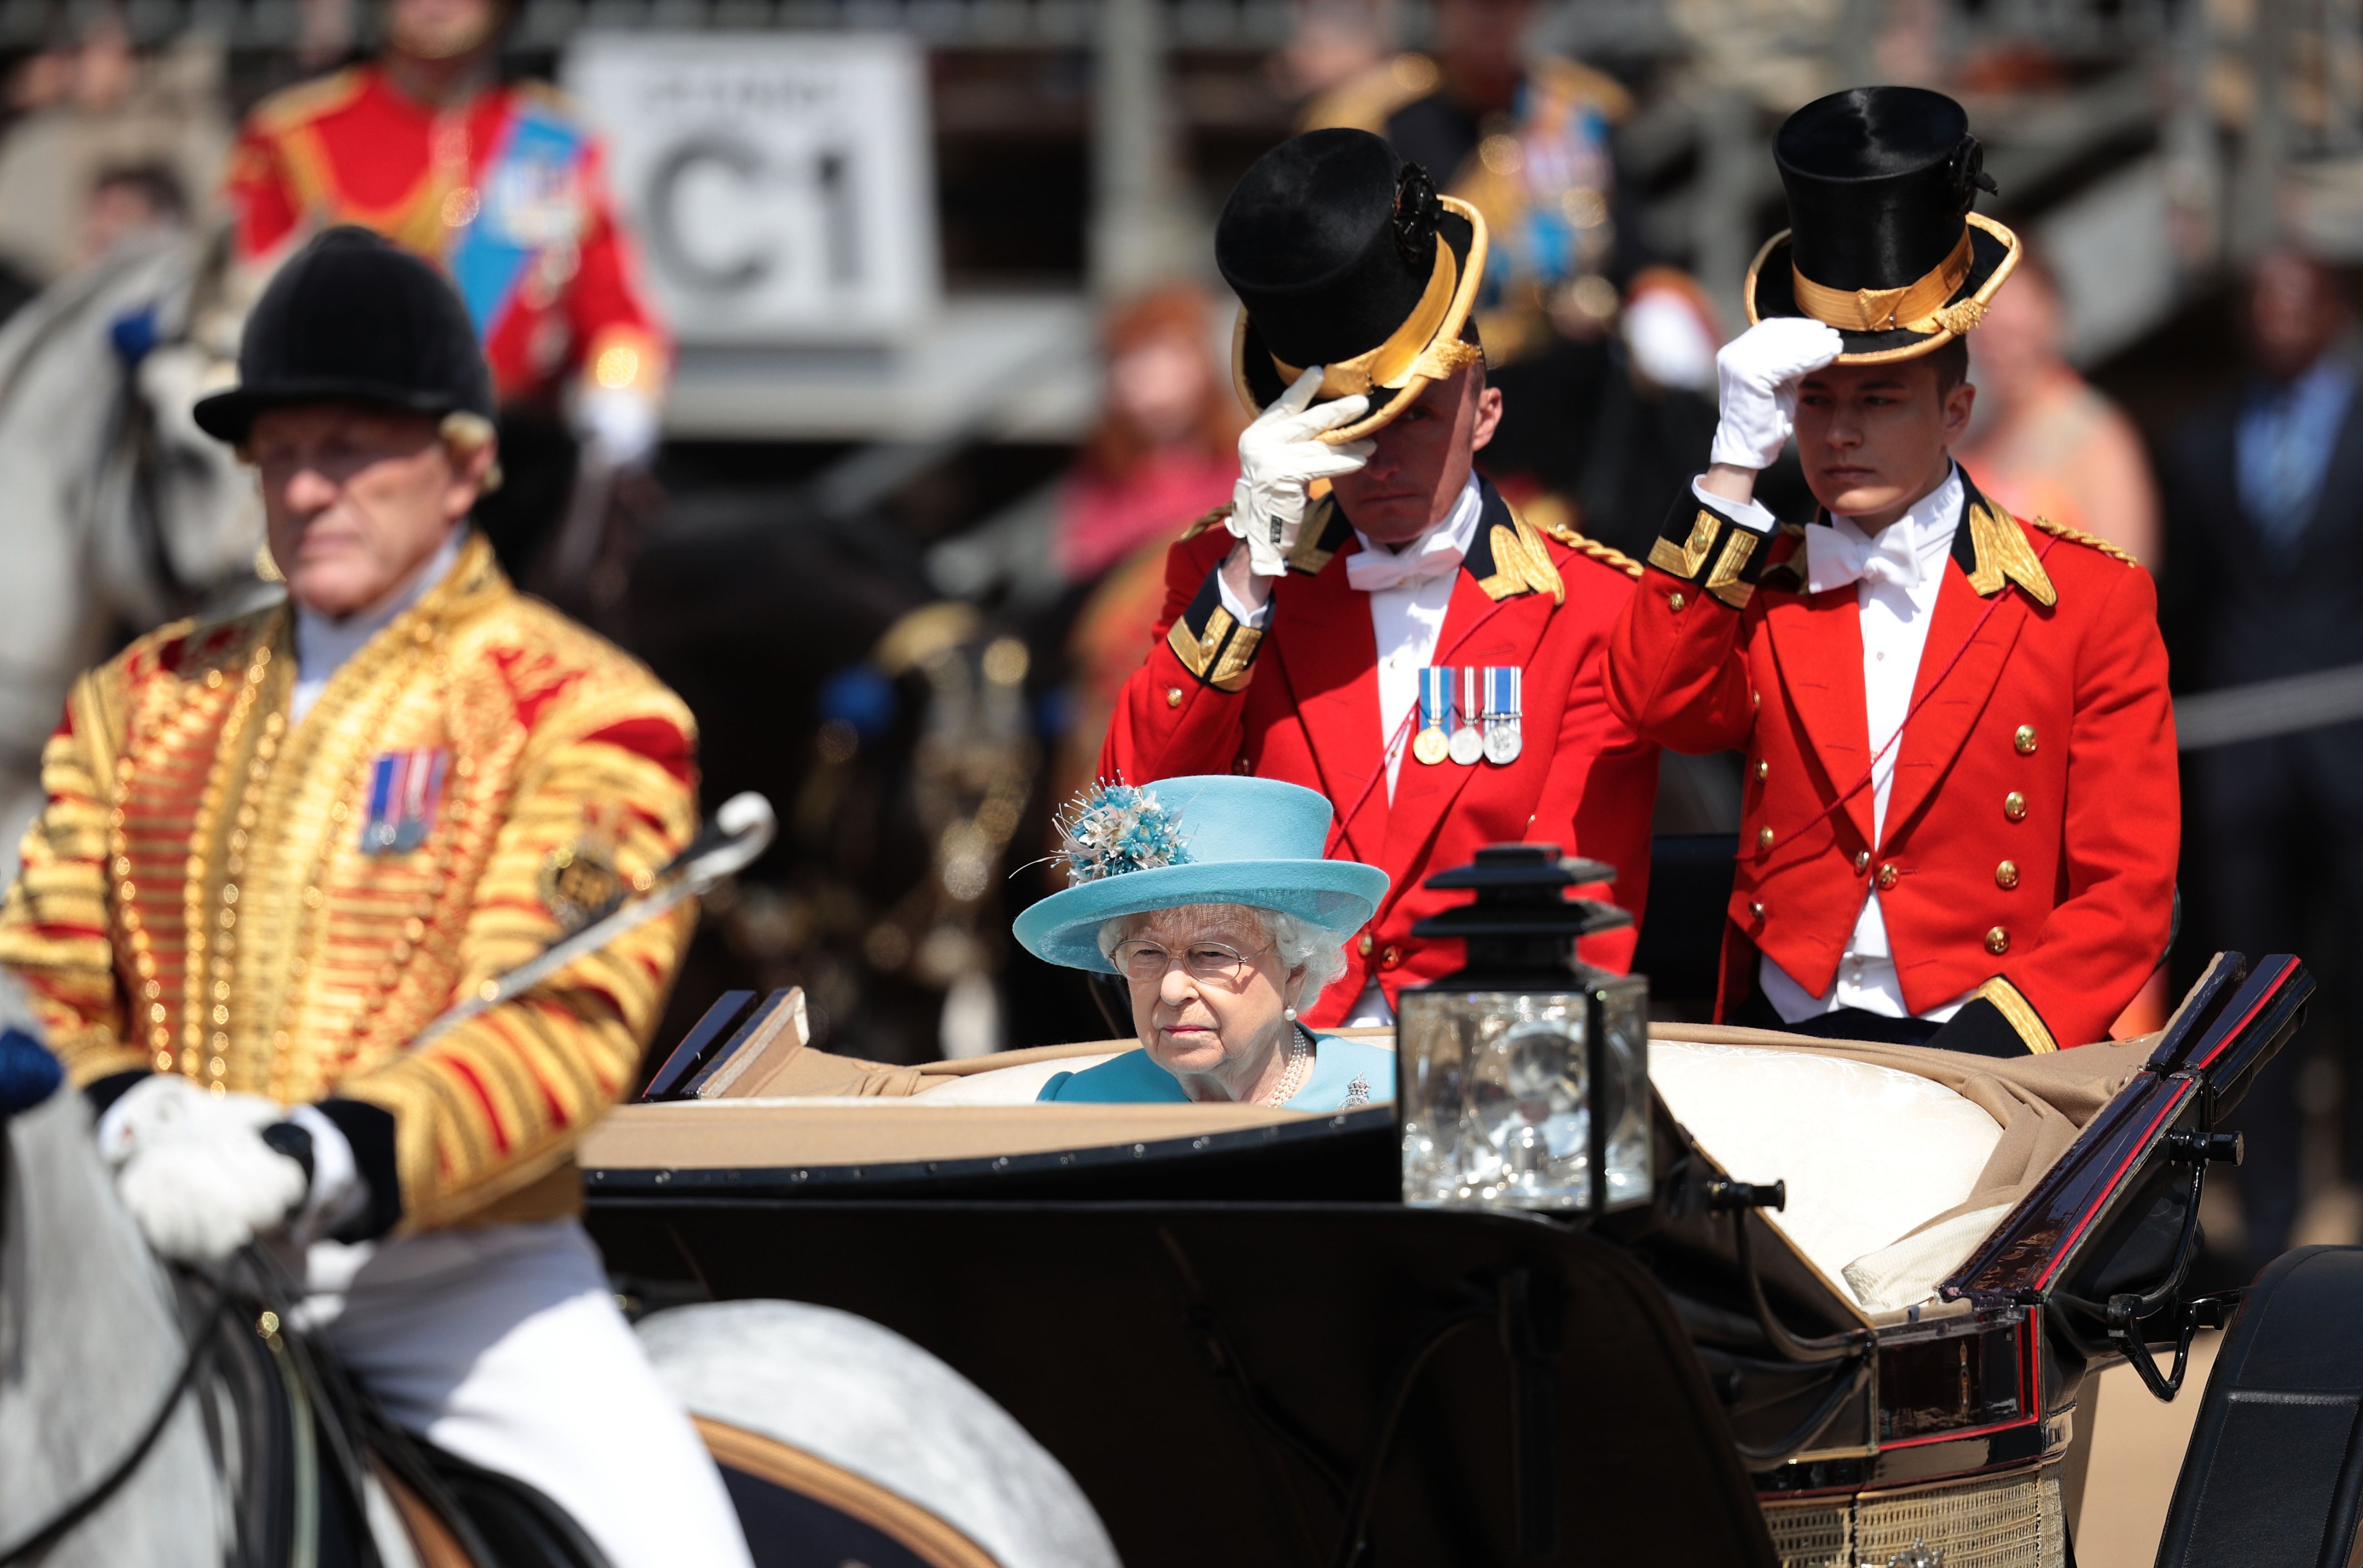 Queen Elizabeth II arrives at The Royal Horseguards during the Trooping The Colour ceremony on June 9, 2018 in London, England. The annual ceremony involving over 1,400 guardsmen and cavalry, is believed to have first been performed during the reign of King Charles II. The parade marks the official birthday of the Sovereign, even though the Queen's actual birthday is on April 21st (Dan Kitwood—Getty Images)